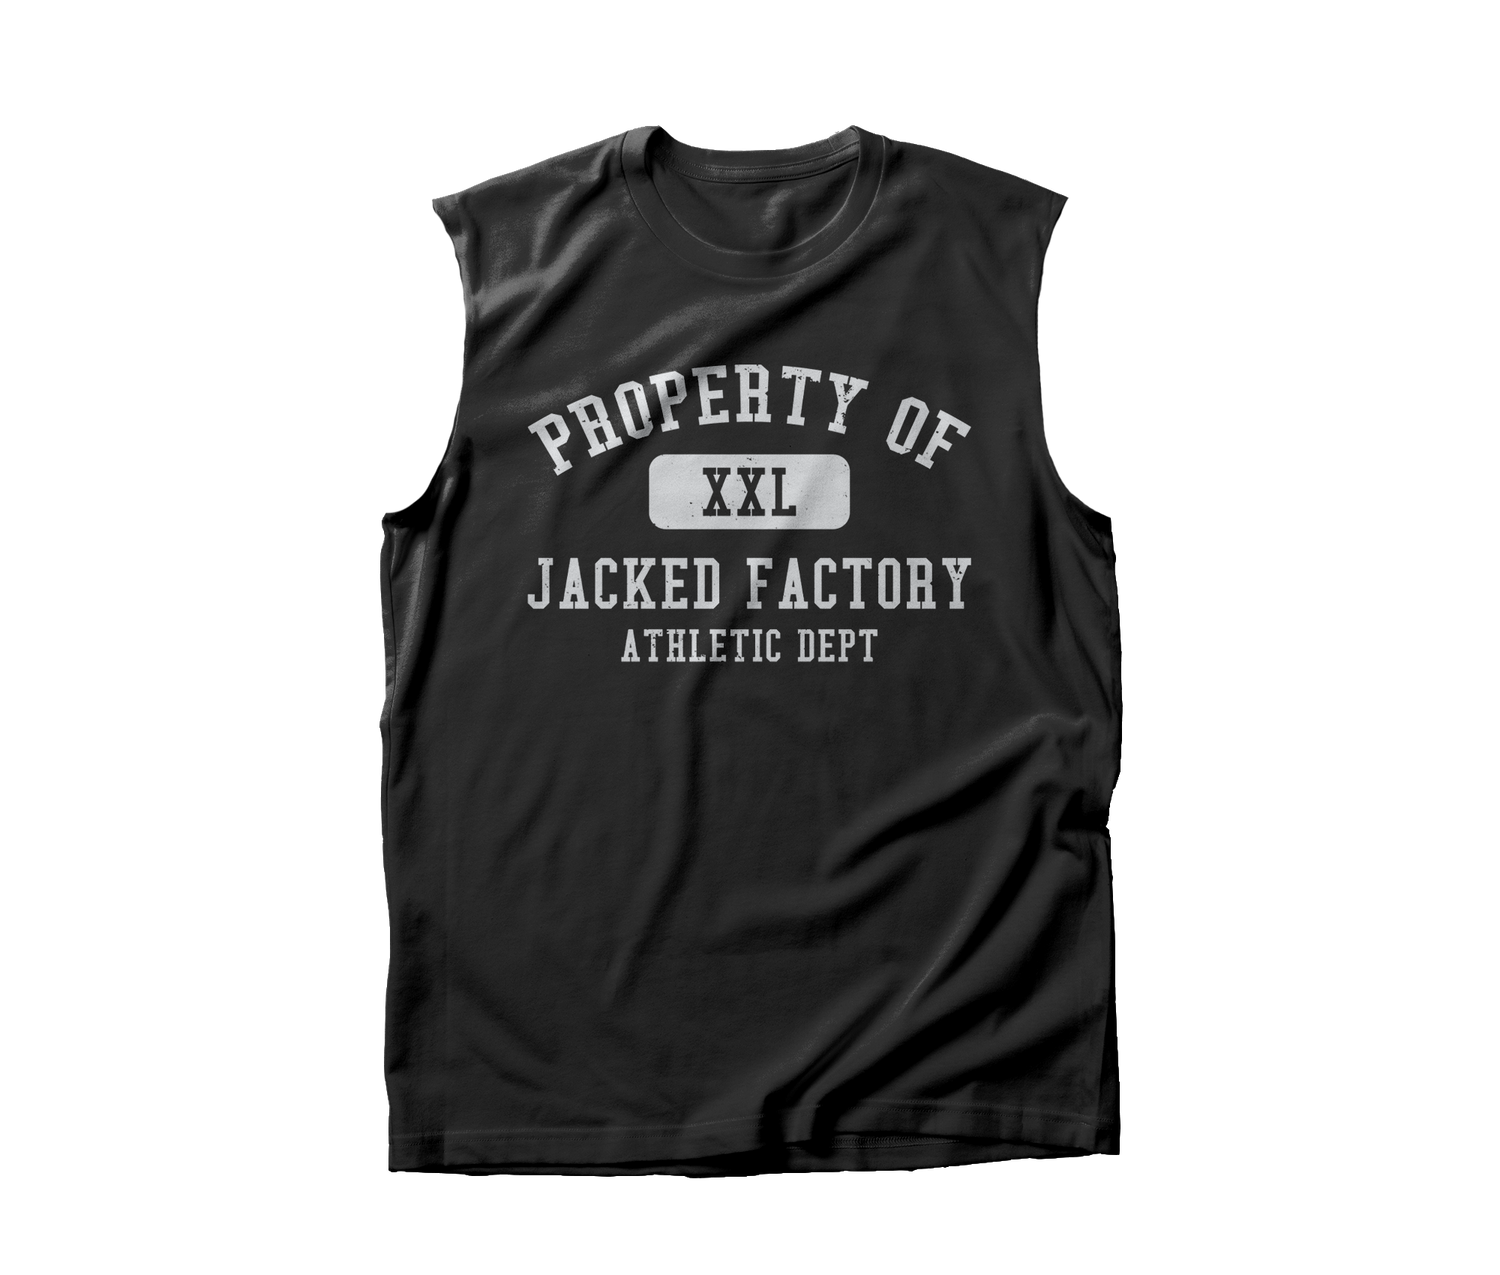 Black Muscle Tank that says "PROPERTY OF XXL JACKED FACTORY ATHLETIC DEPT" in white